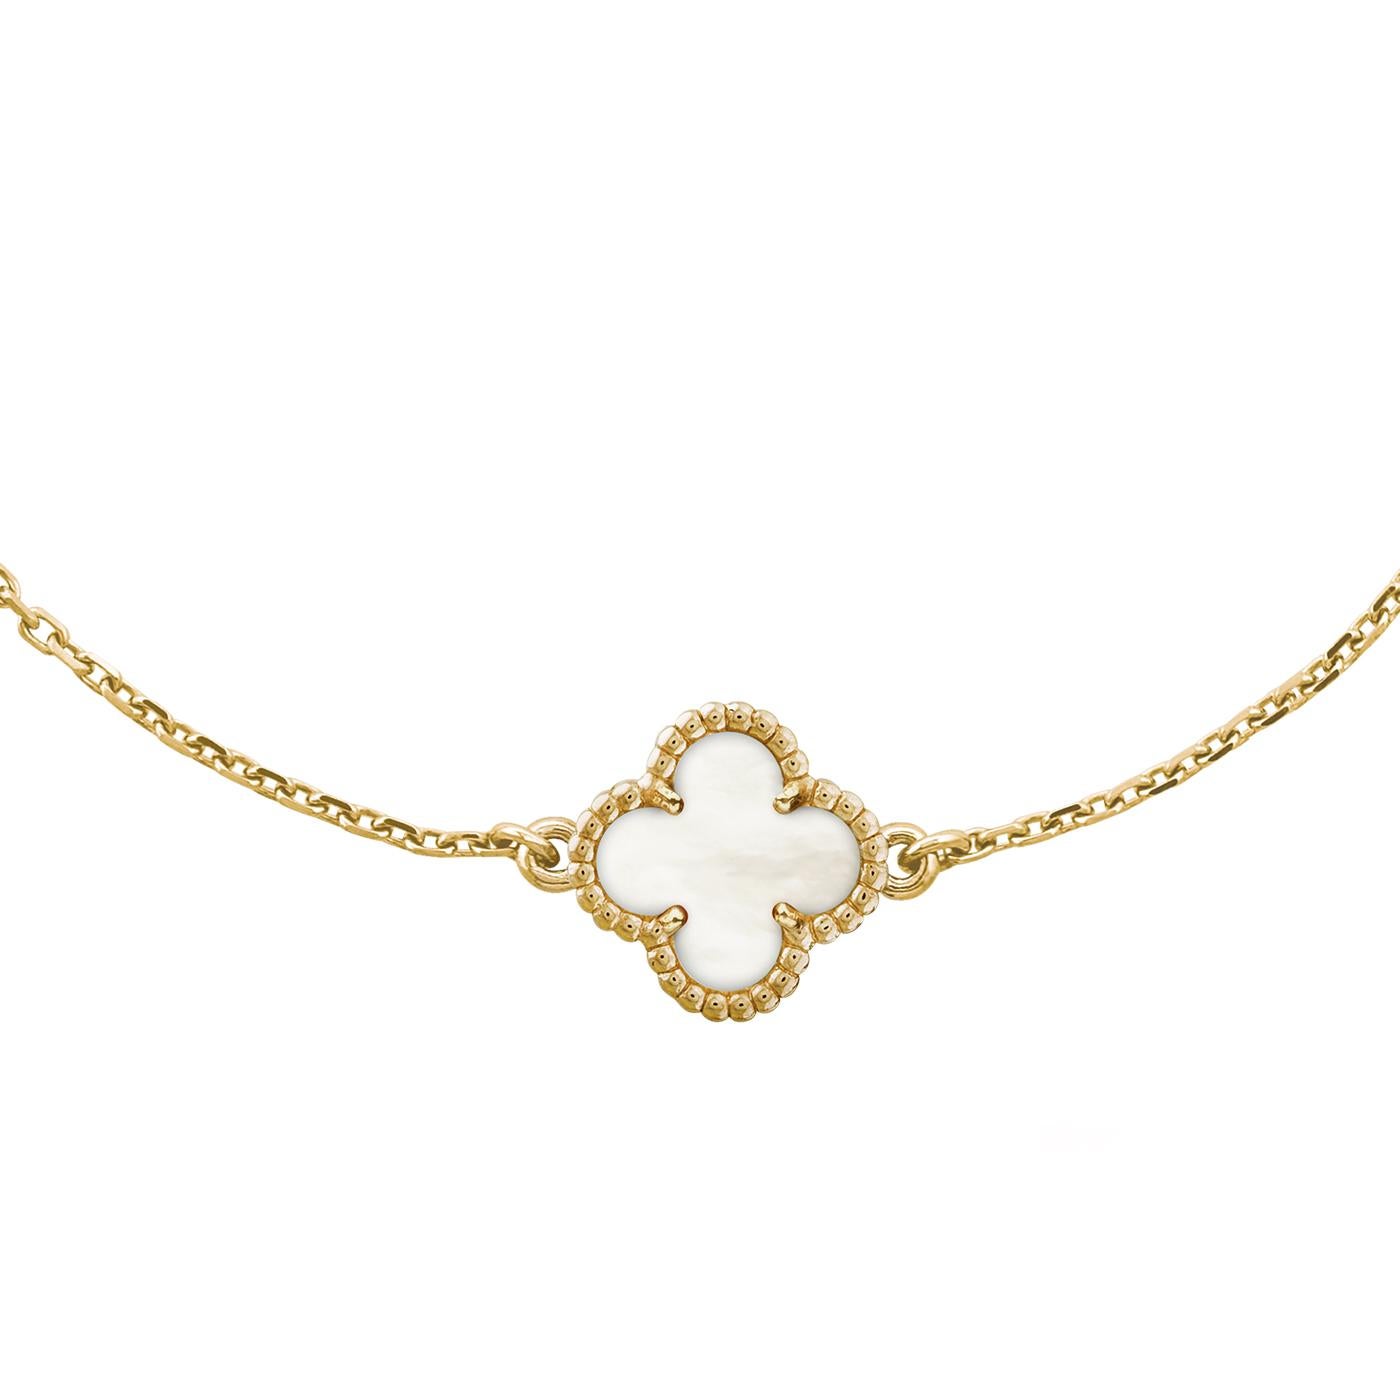 Created in 1968 by Van Cleef & Arpels and inspired by the four-leaf clover, the Alhambra® jewelry collection has established itself as a timeless symbol of luck. Its pure lines and distinctive beaded contour combined with a broad palette of natural